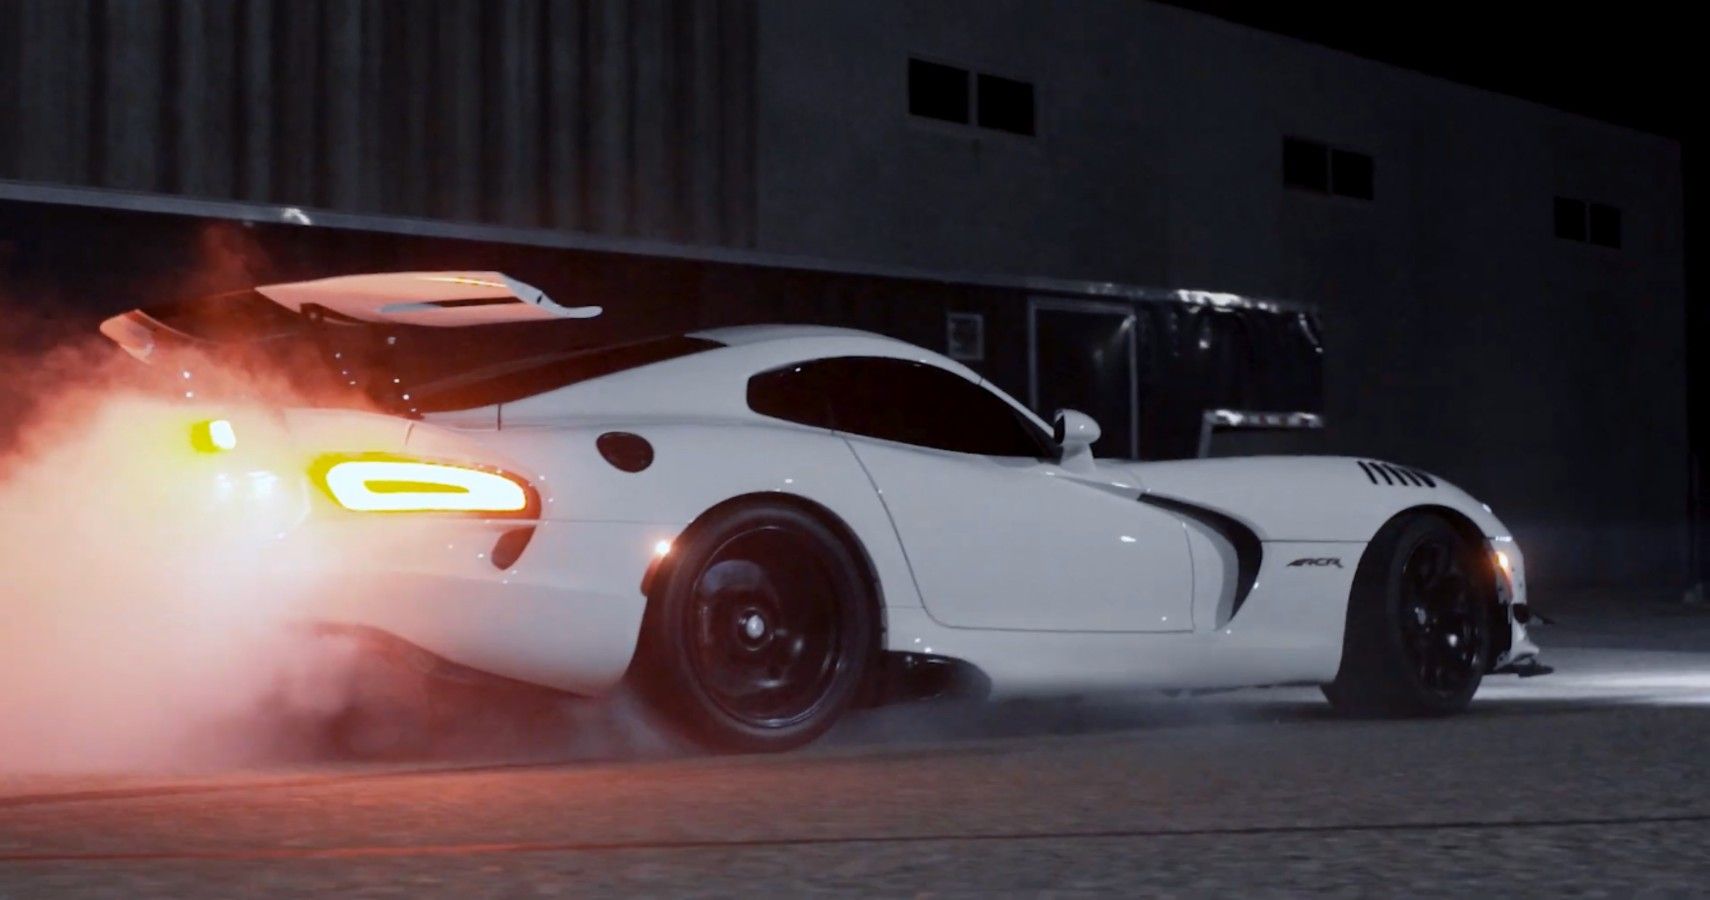 With over 2,000 horsepower, this Viper puts the extreme in ACR-Extreme